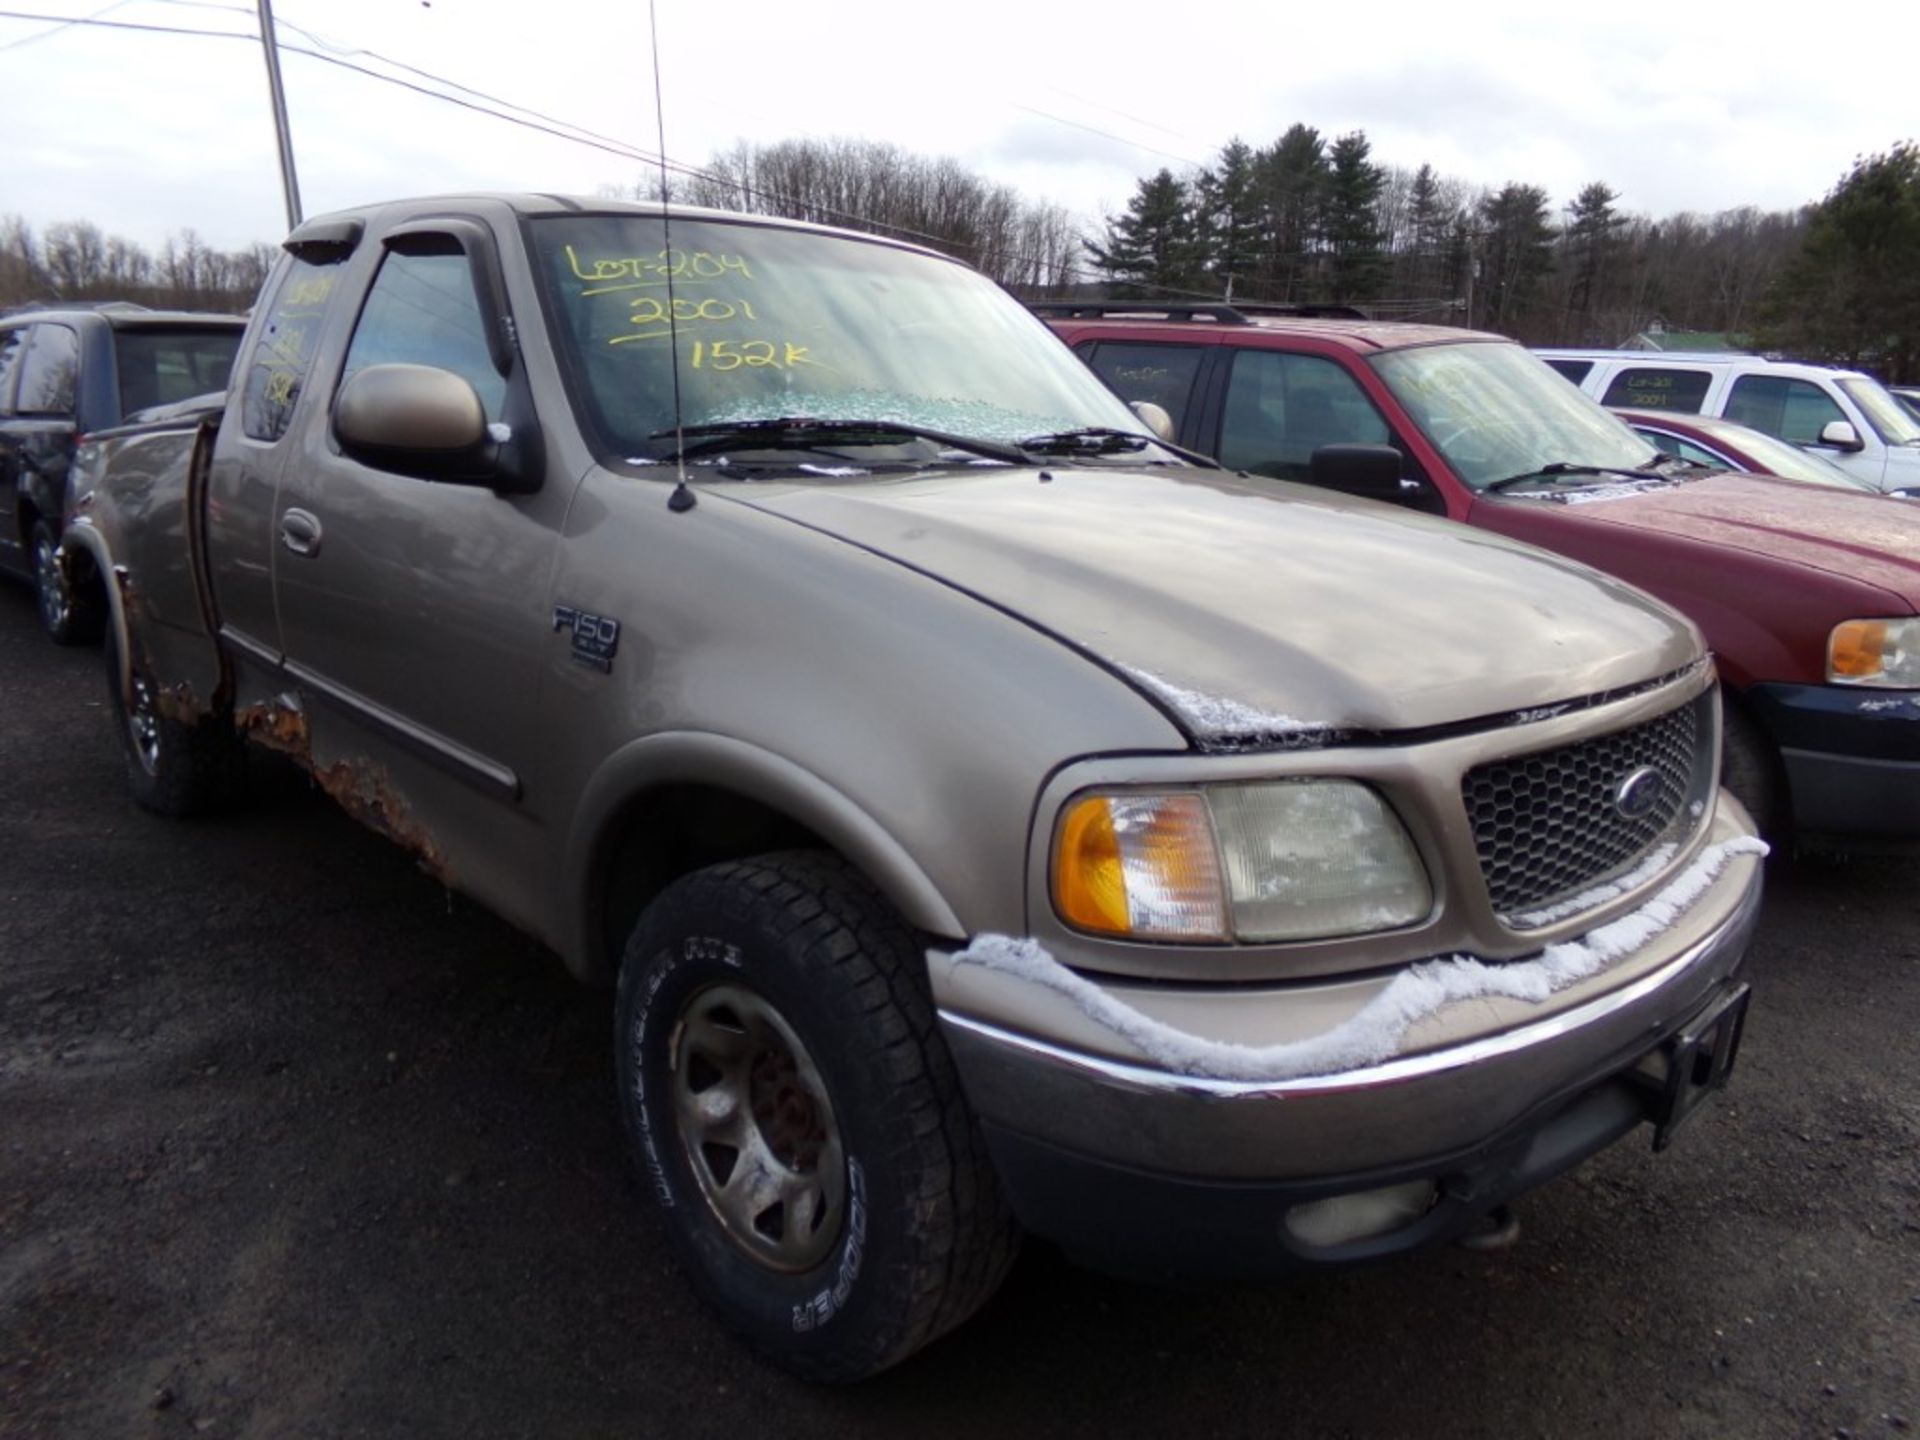 2001 Ford F150 Ext. Cab XLT, 4x4, Tan, 152,810 Miles, VIN#:2FTPX18L41CA89239 - OPEN TO ALL BUYERS, - Image 4 of 12